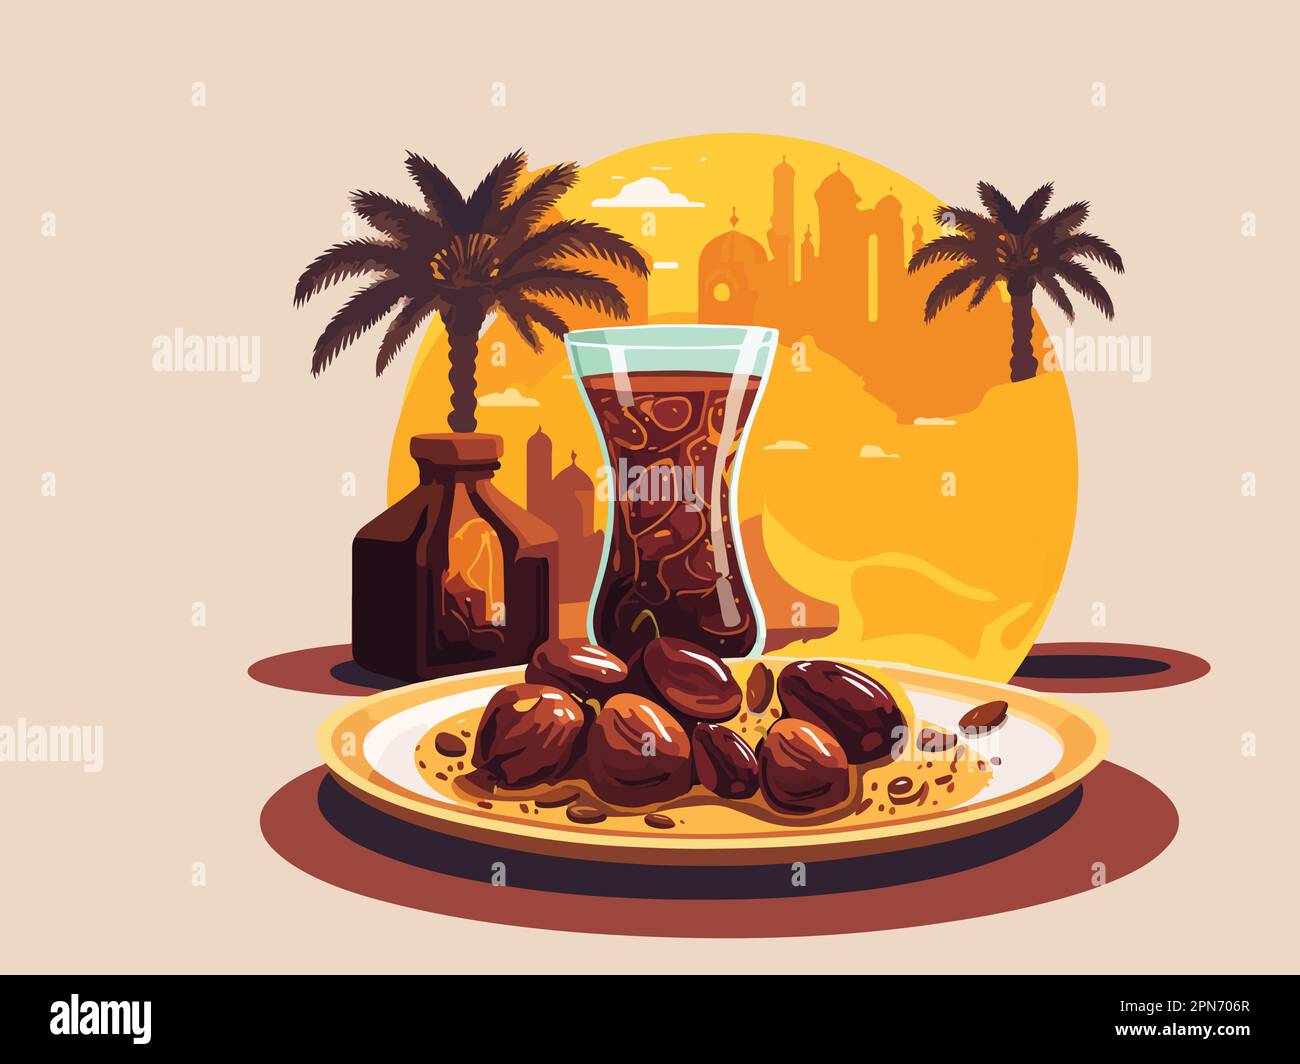 Dates Fruit Plate With Drink Glass, Jar, Palm Trees On Silhouette Mosque Background In Suhoor Time. Stock Vector